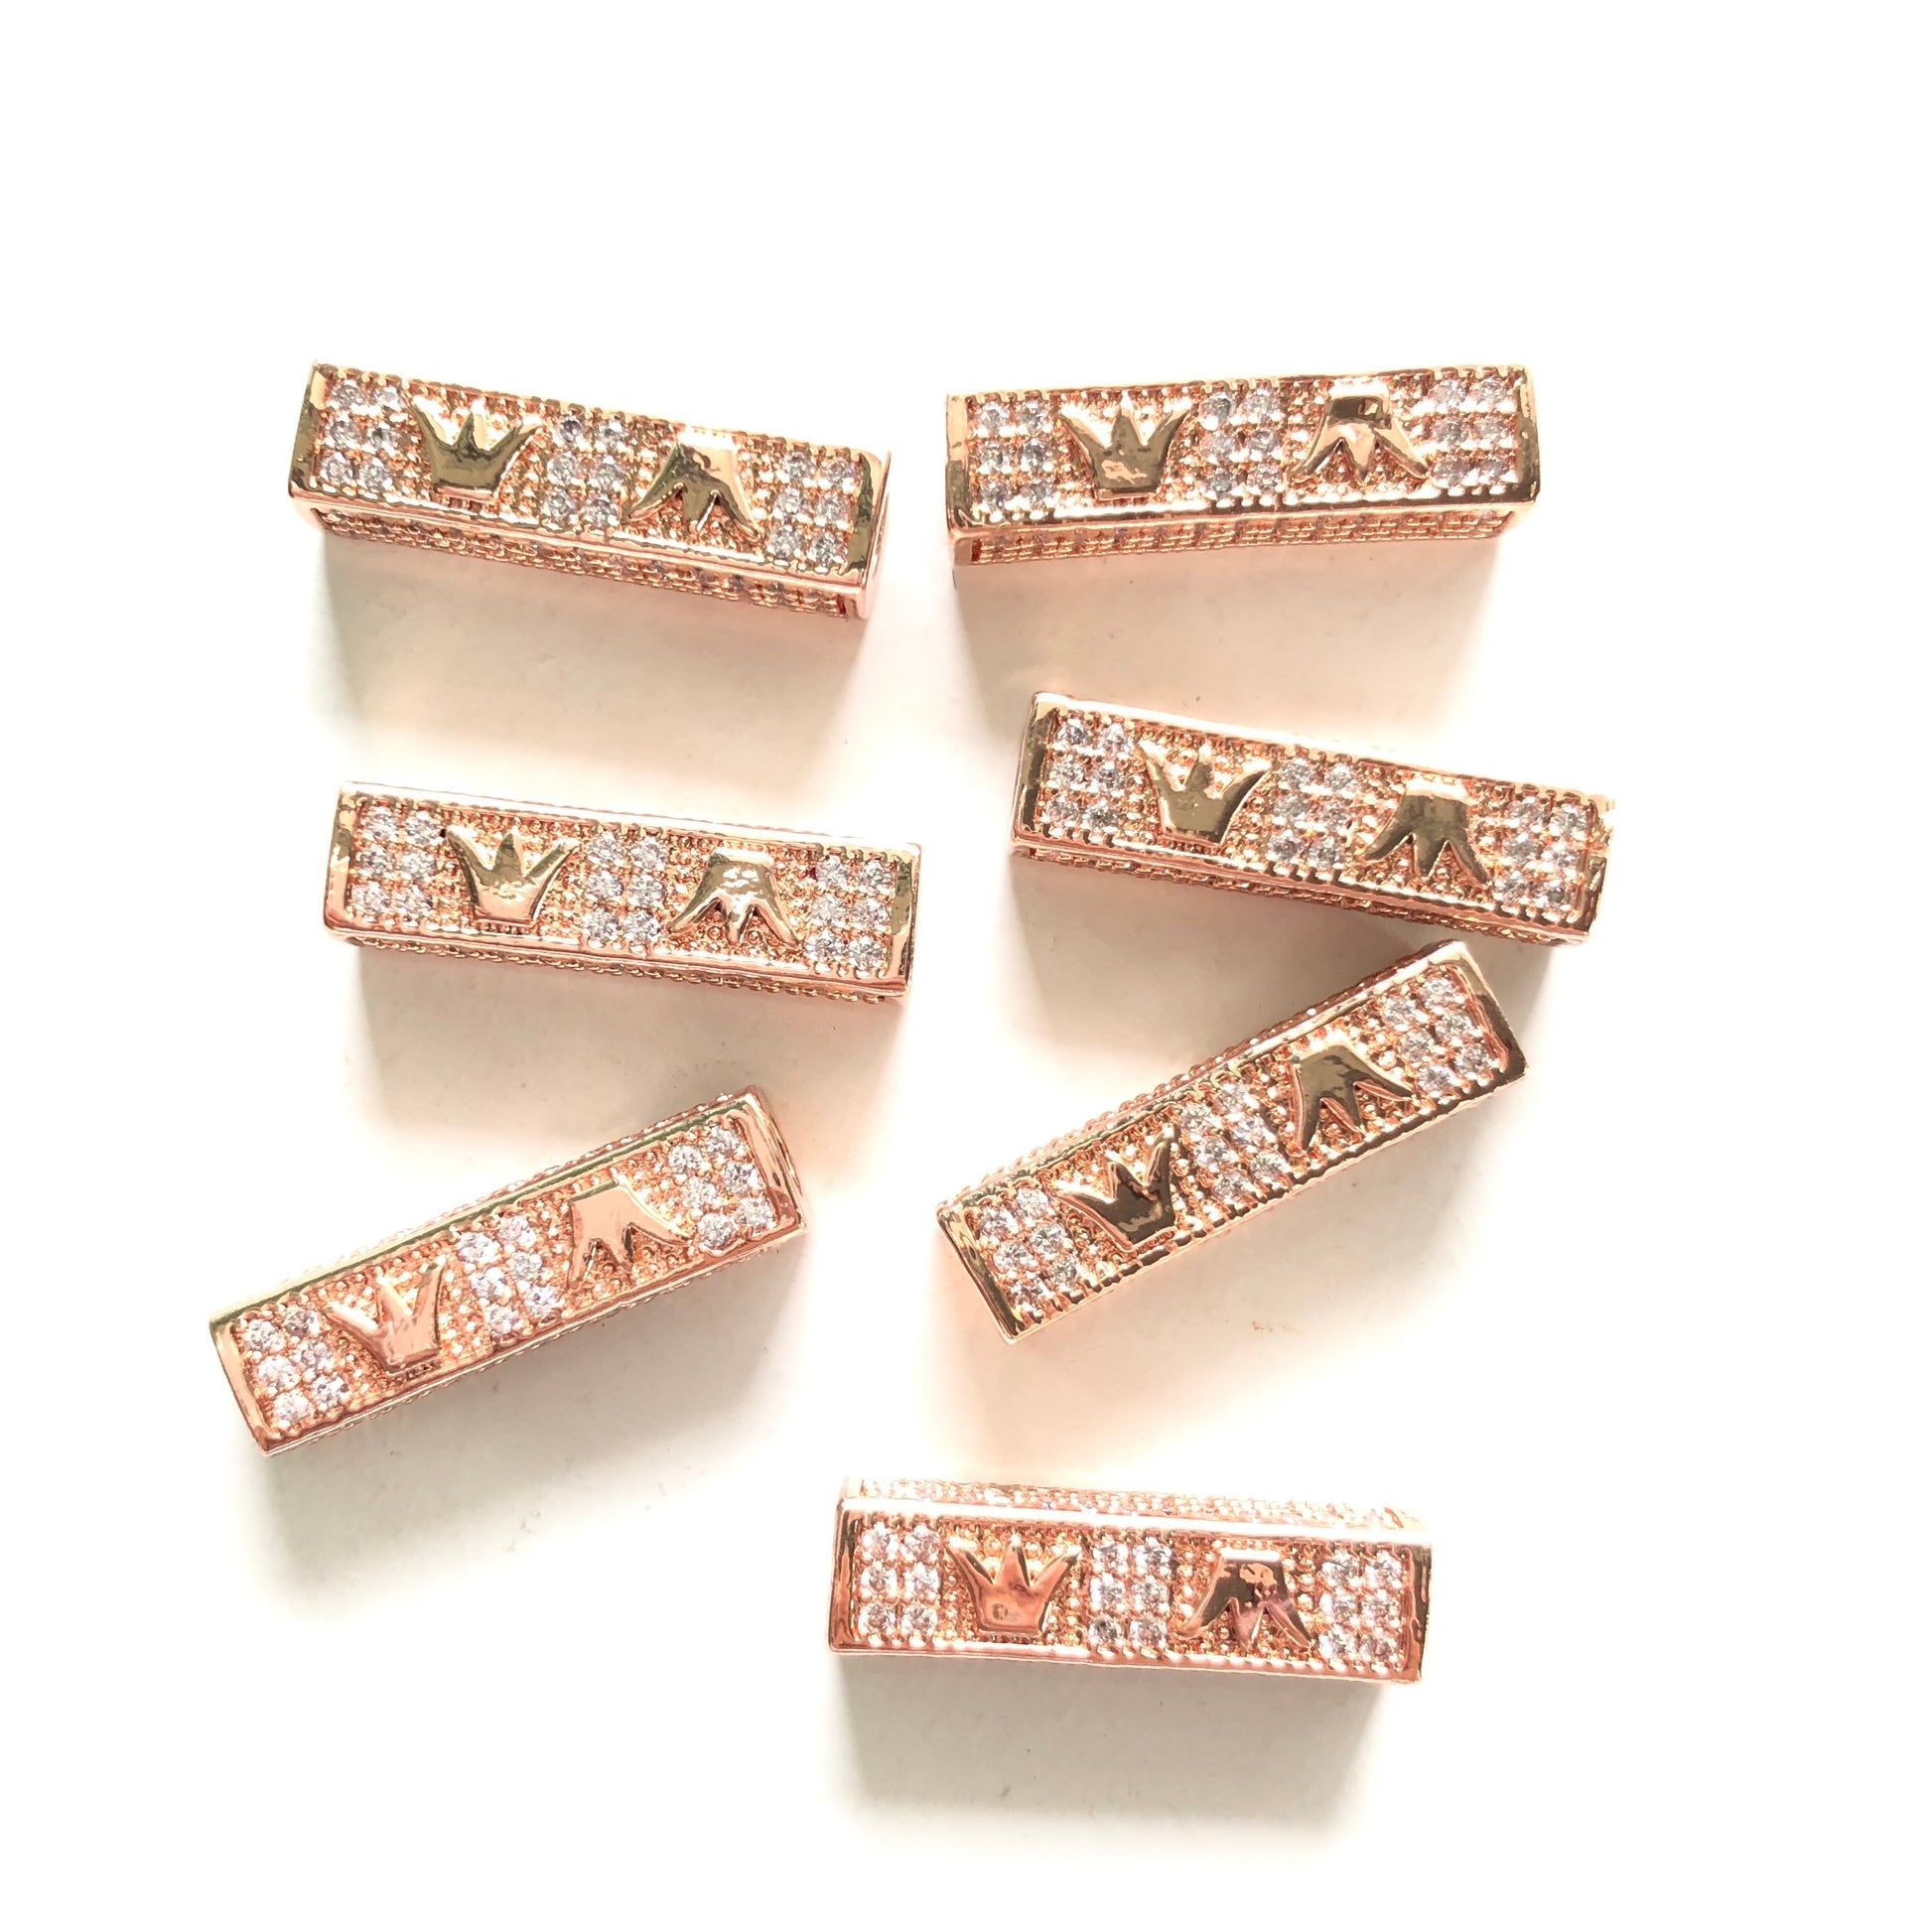 10-20pcs/lot 21*6mm CZ Paved Crown Centerpiece Spacers Rose Gold CZ Paved Spacers Cuboid Spacers Charms Beads Beyond